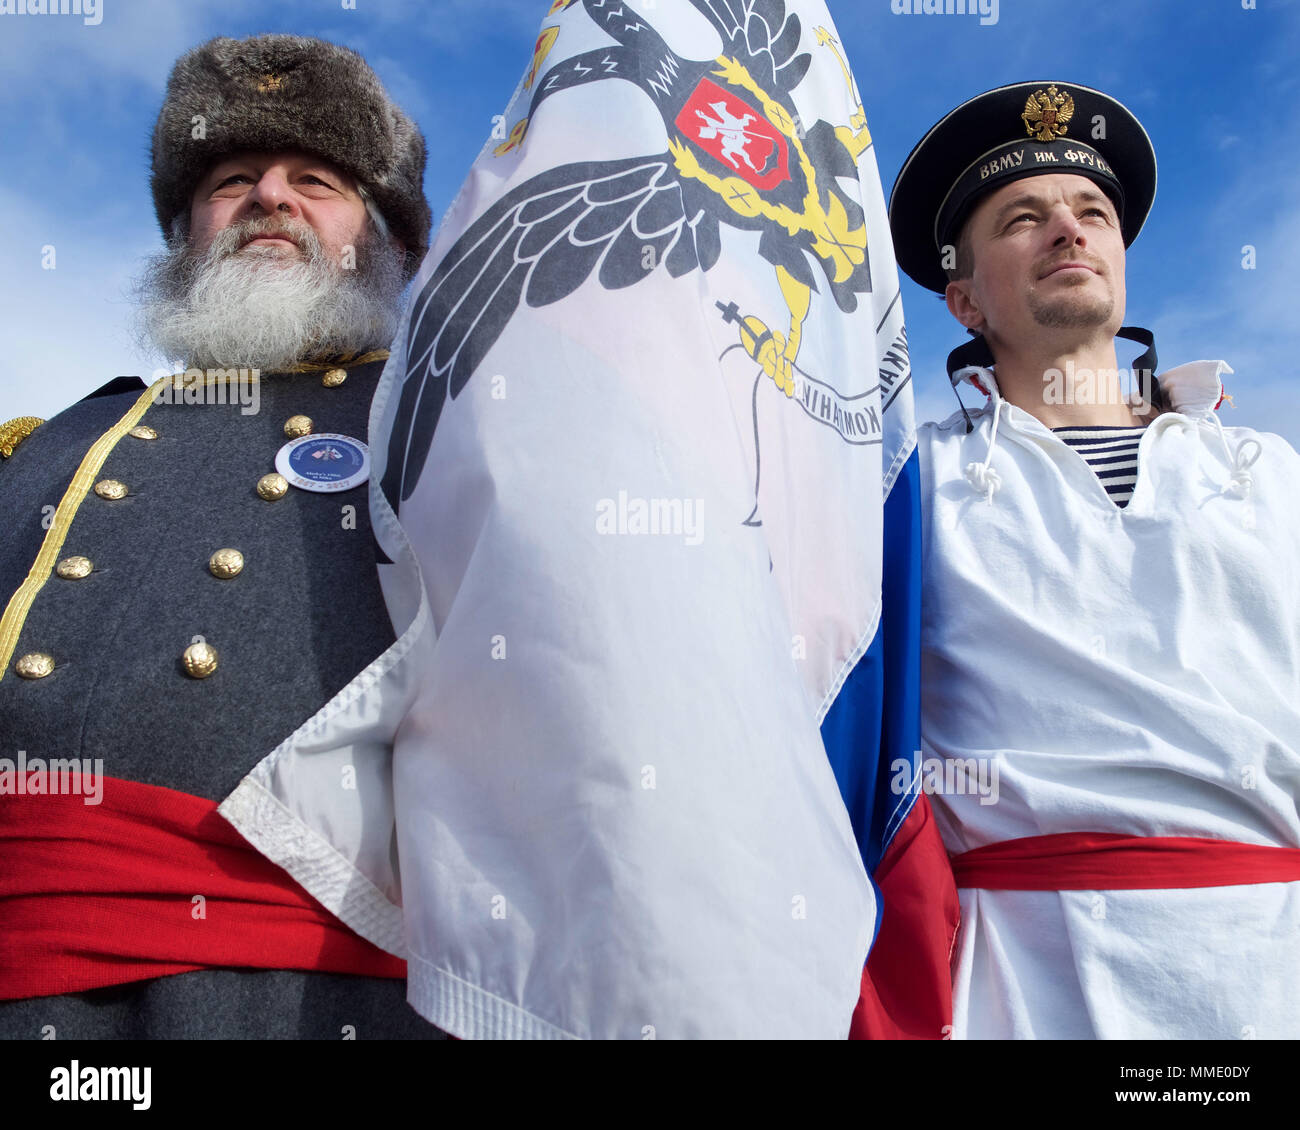 Ron Conklin portrays Russian Commissioner Alexi Pestchouroff, and Roman Sorokin portrays a Russian sailor at Castle Hill, Sitka, Alaska, during the Oct. 18, 2017, reenactment of the transfer of Alaska from Russia to the United States. Conklin has portrayed Pestchouroff in the reenactment for nearly two decades. (U.S. Army National Guard photo by Sgt. David Bedard/released) Stock Photo